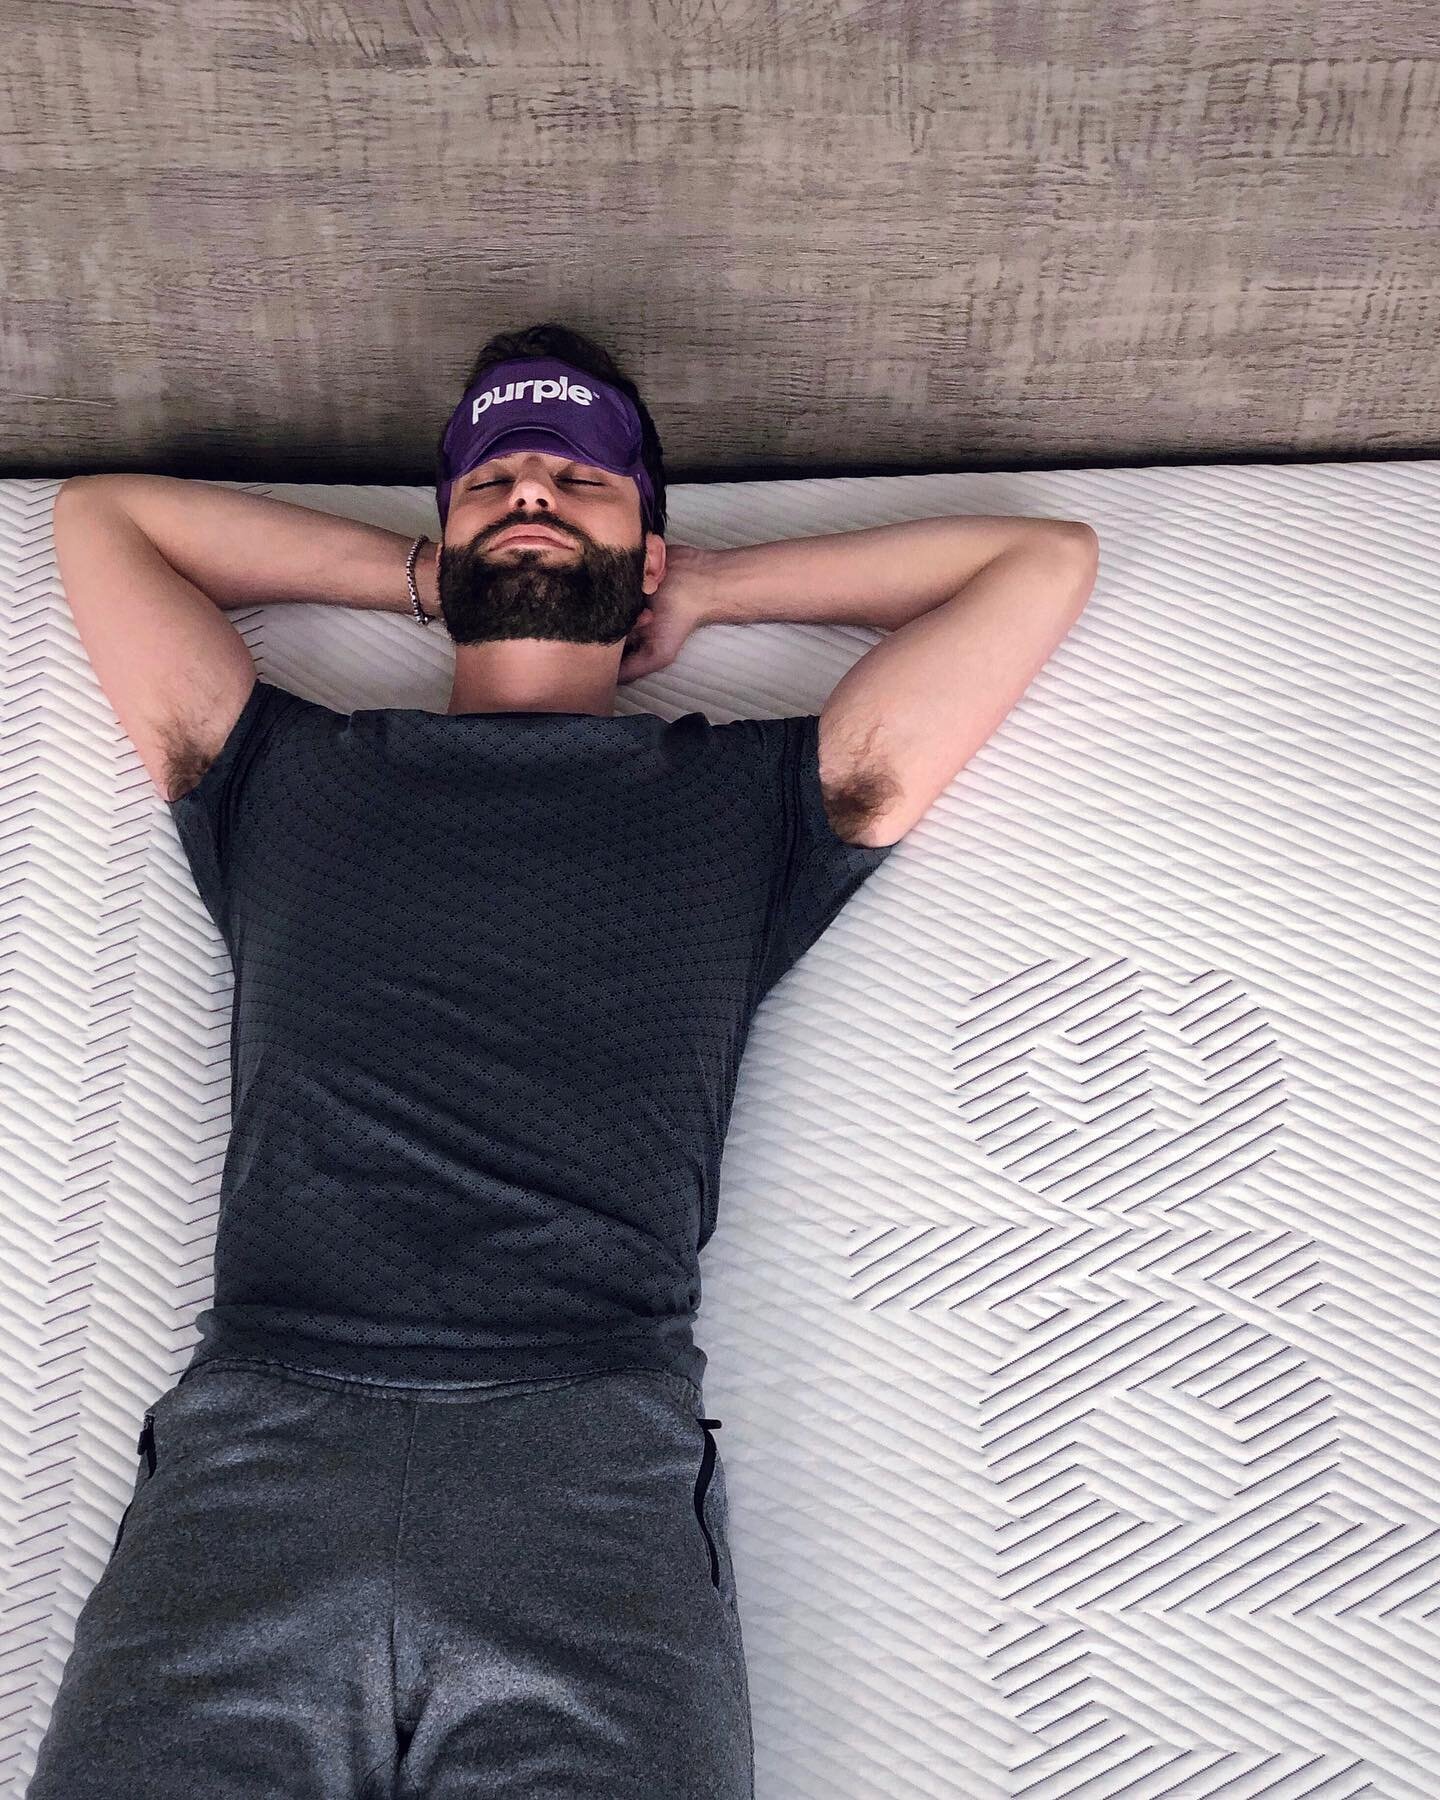 After hearing so many raving reviews on @purple, we decided to give their Purple 4 Hybrid Mattress a try. Least to say, I can see why everyone is so obsessed - all I want to do now is lay in by new bed 🤤💤 #PurplePartner #PurpleMattress #LifeOnPurpl